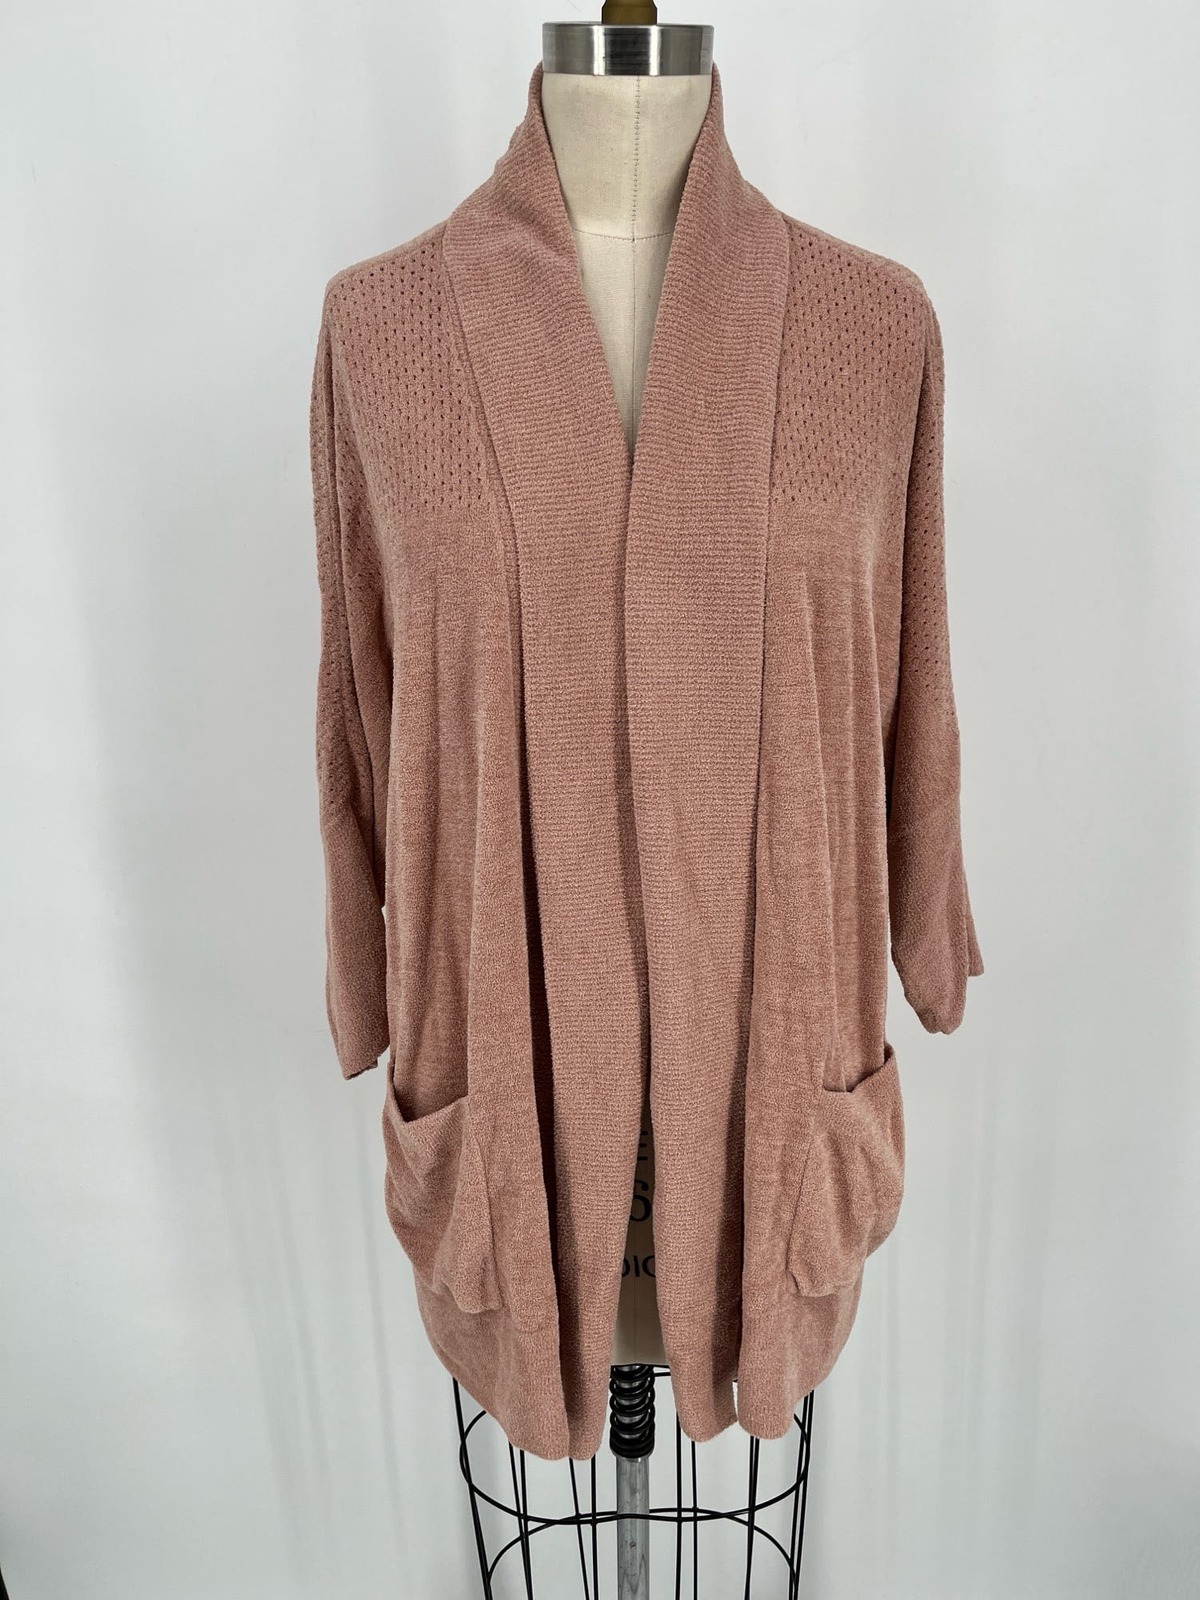 Primary image for Barefoot Dreams CozyChic Ultra Lite Open Front Cardigan Sz L/XL Ballet Pink